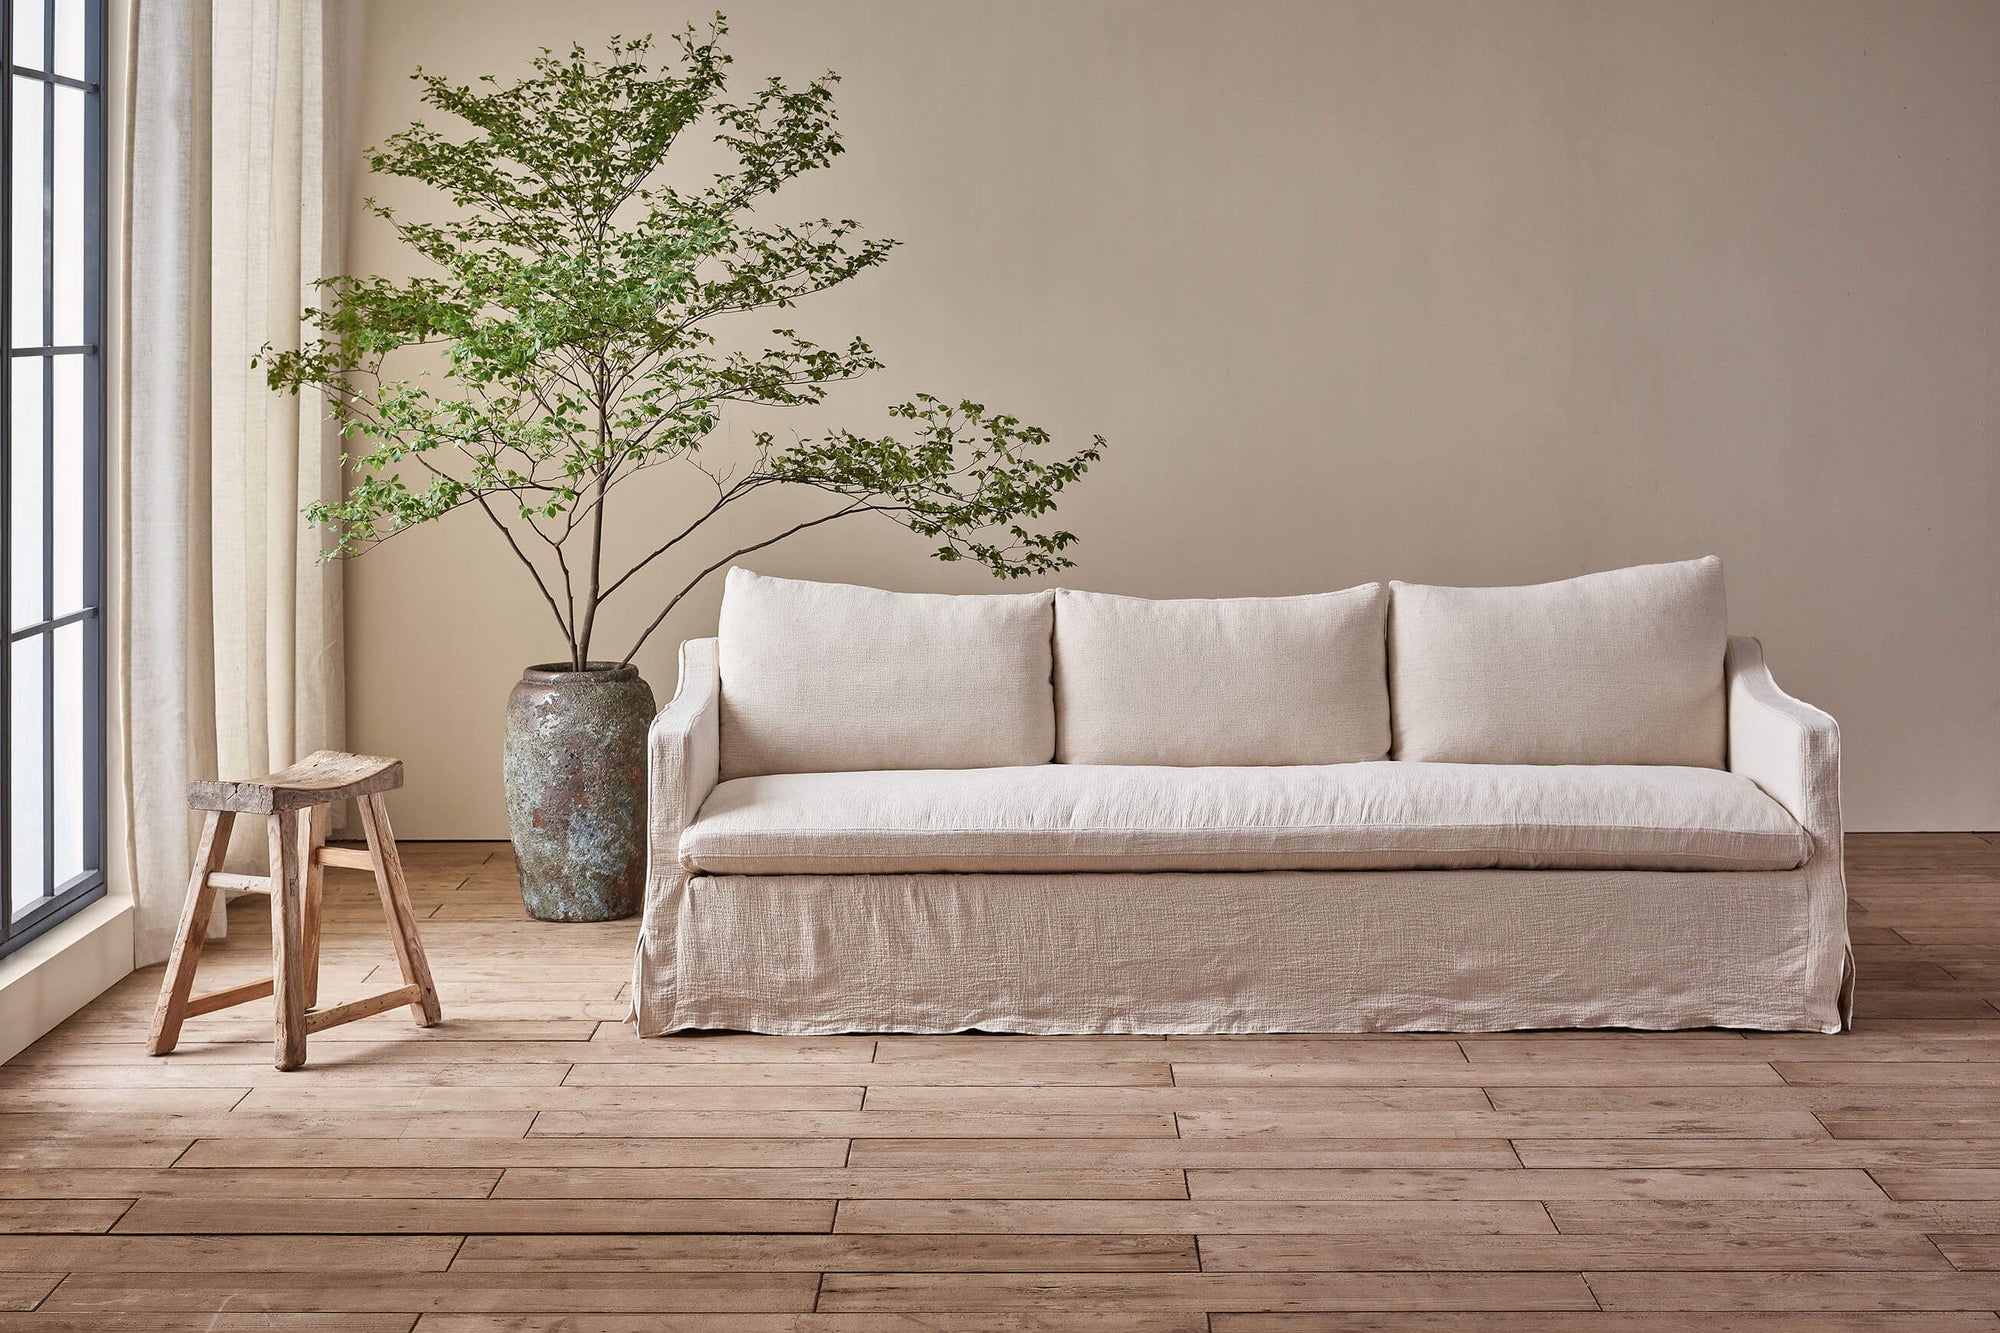 Amelia 96" Sofa in Corn Silk, a light beige Washed Cotton Linen, in front of a large potted plant